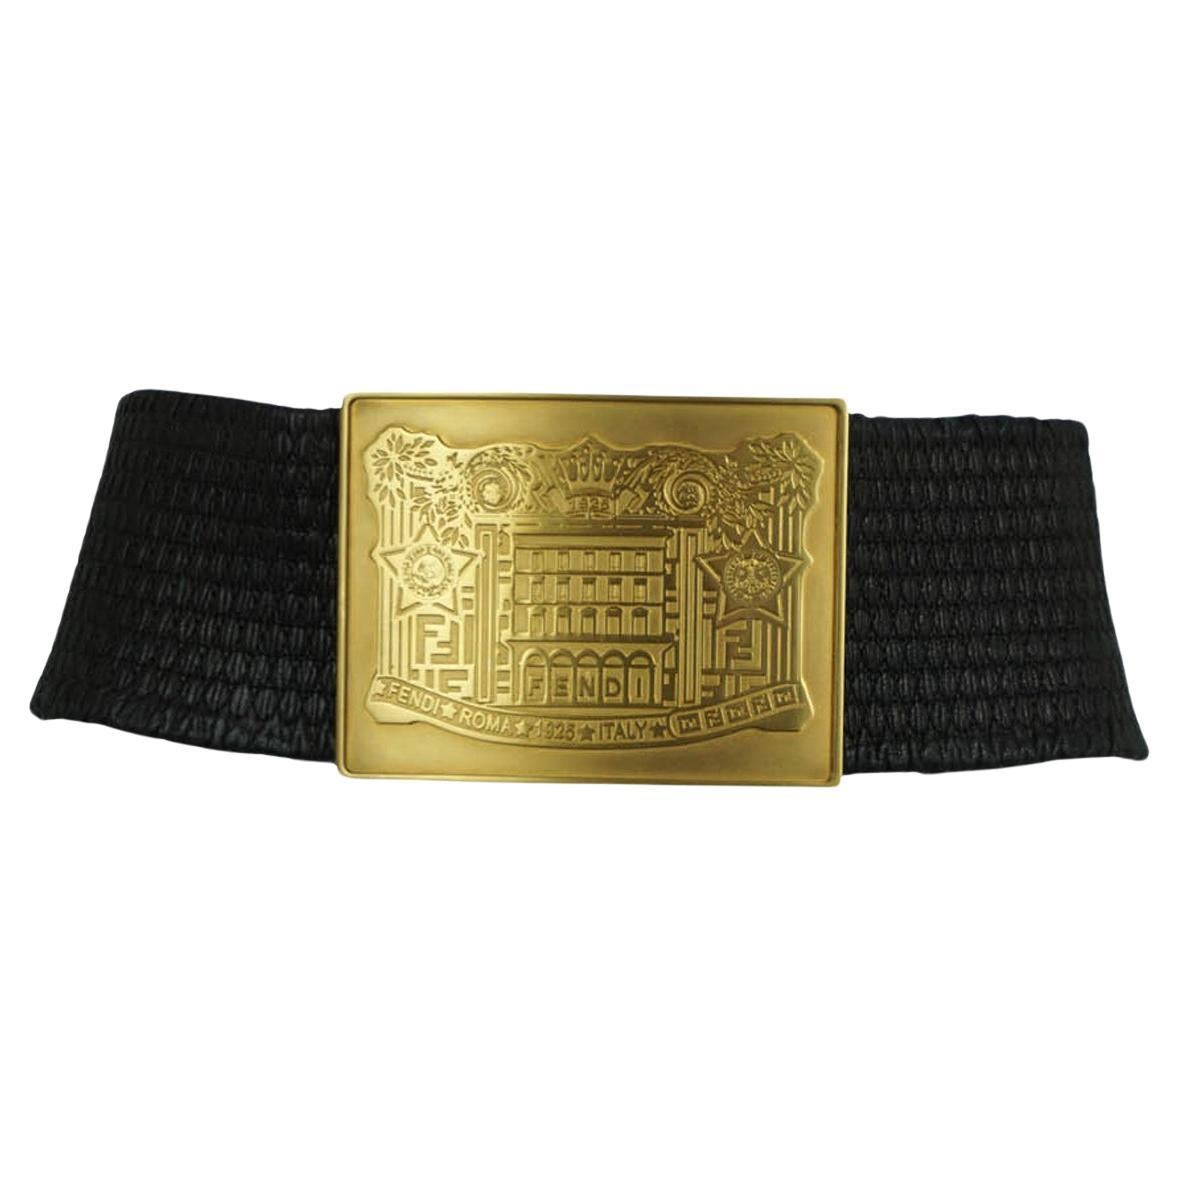 How do you know if a Fendi belt is real?